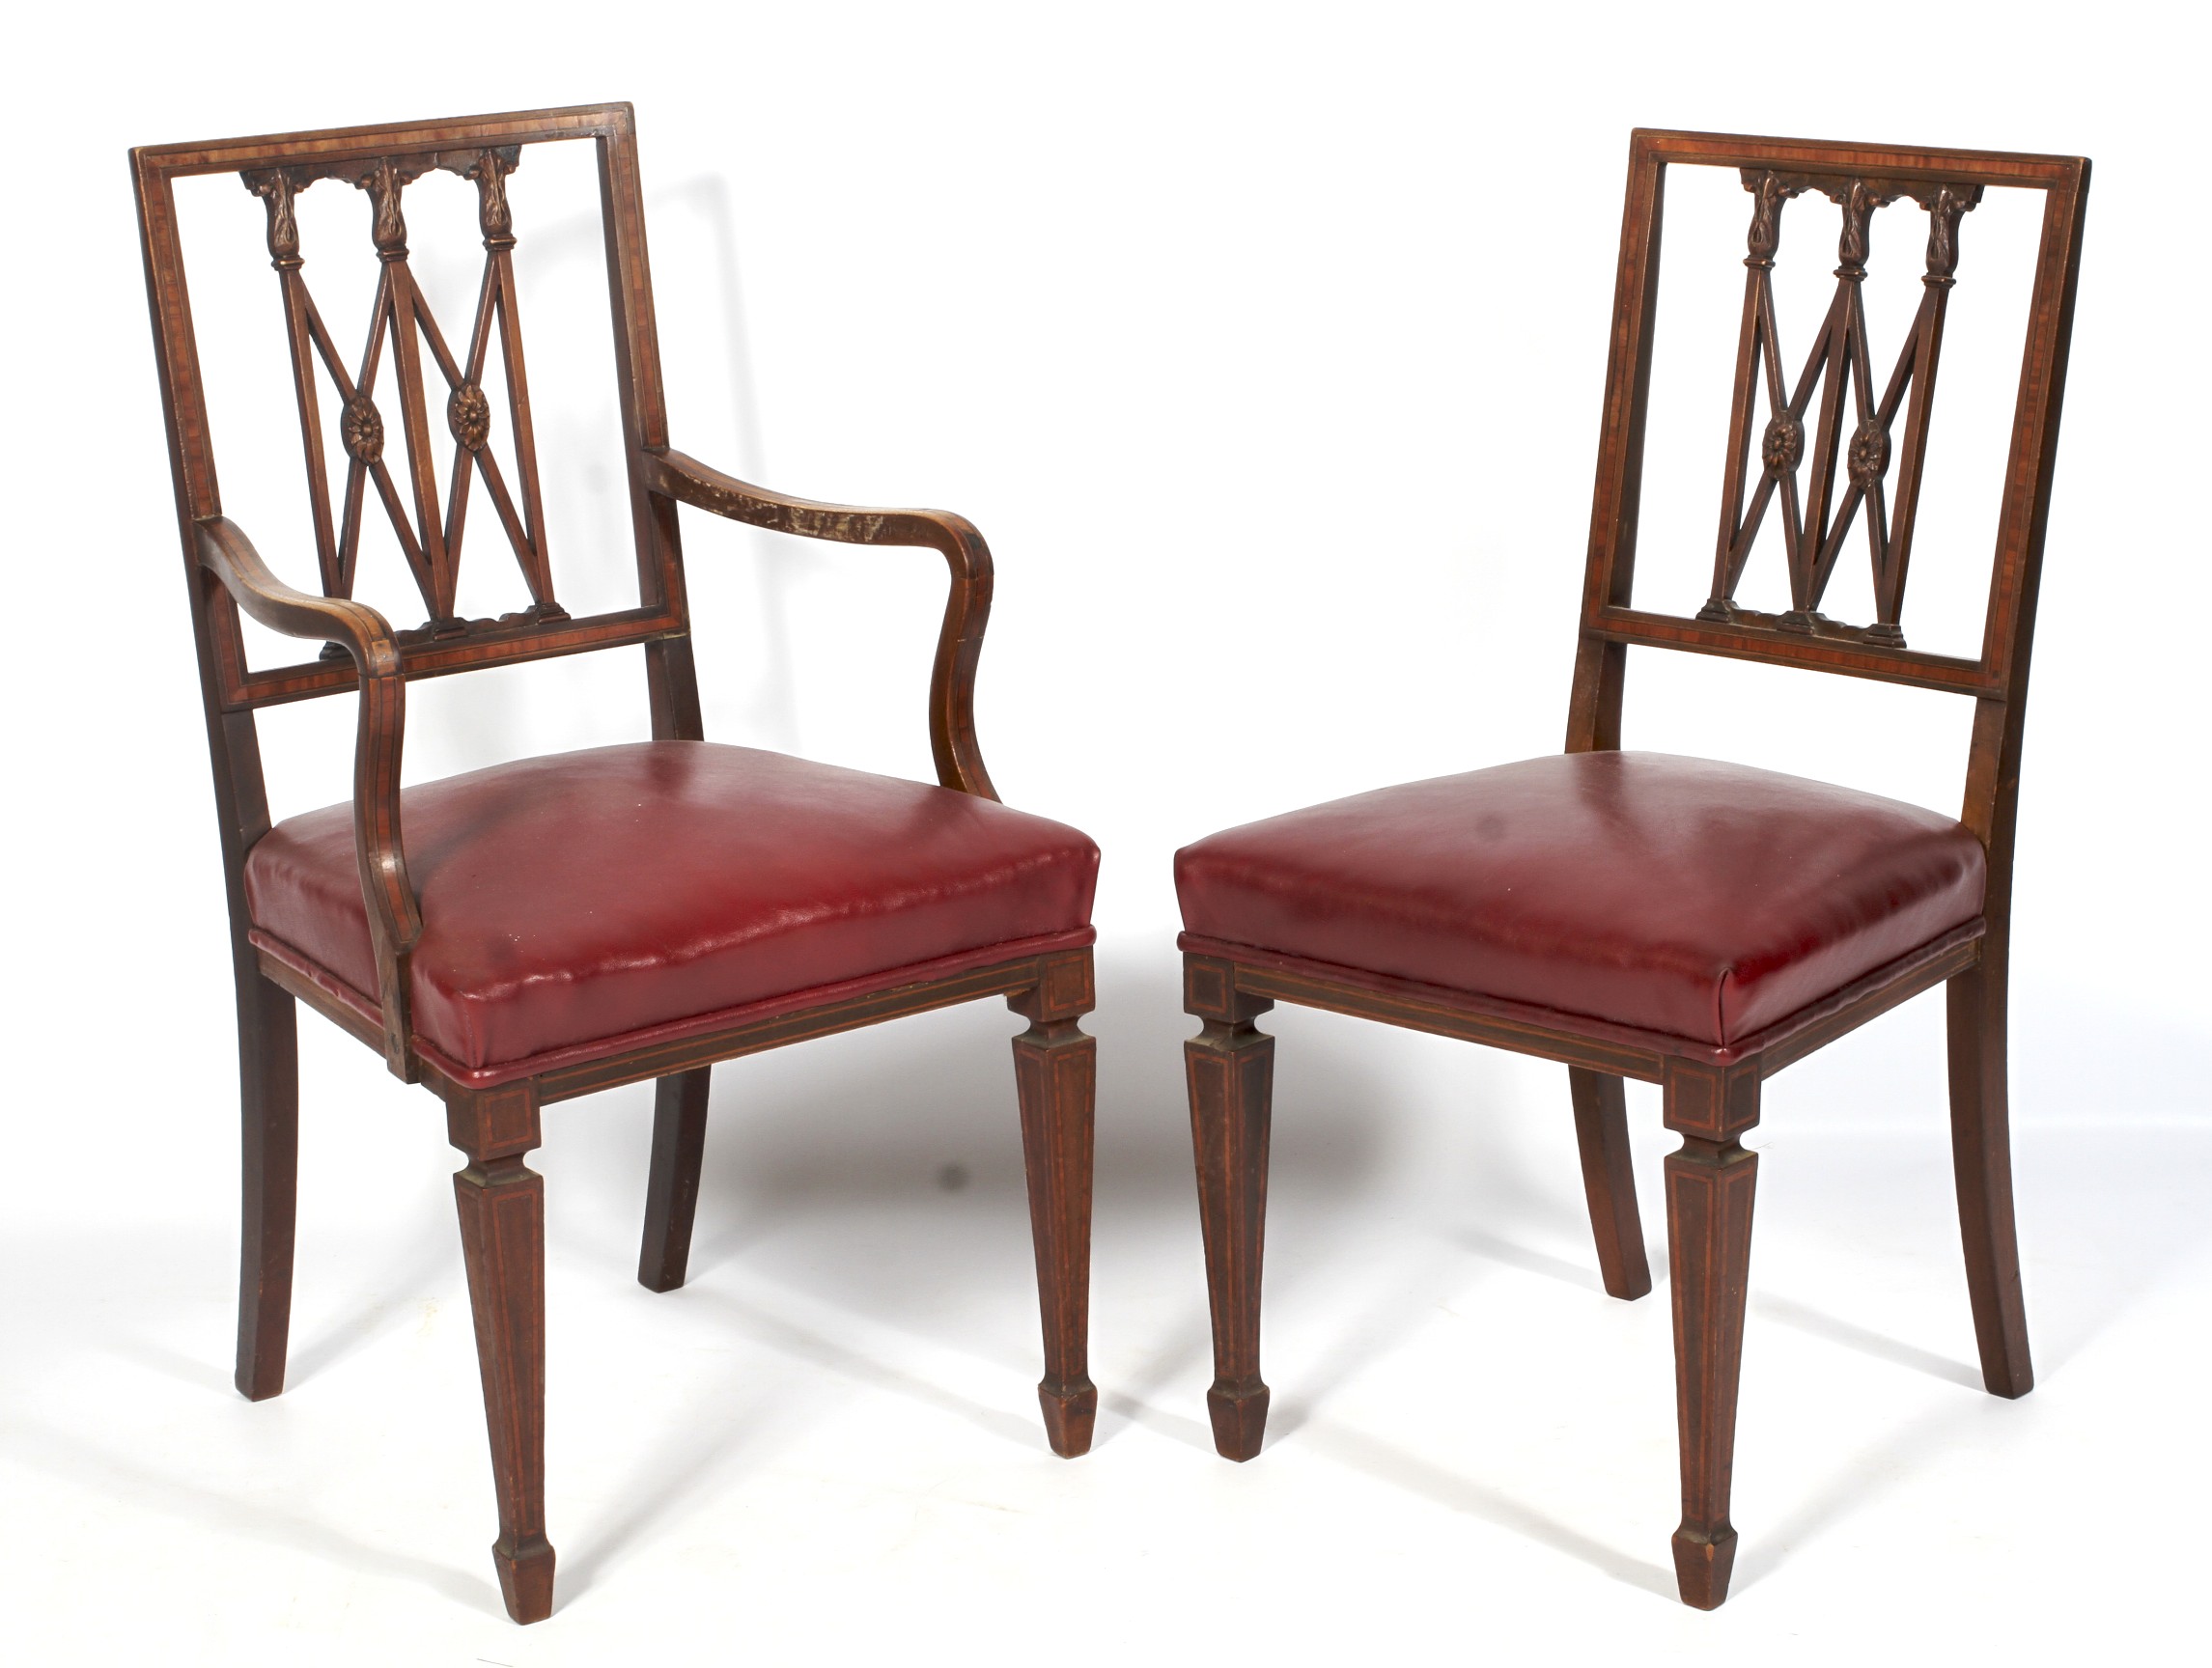 A set of eight Edwardian inlaid mahogany dining chairs with pierced splats. - Image 2 of 2